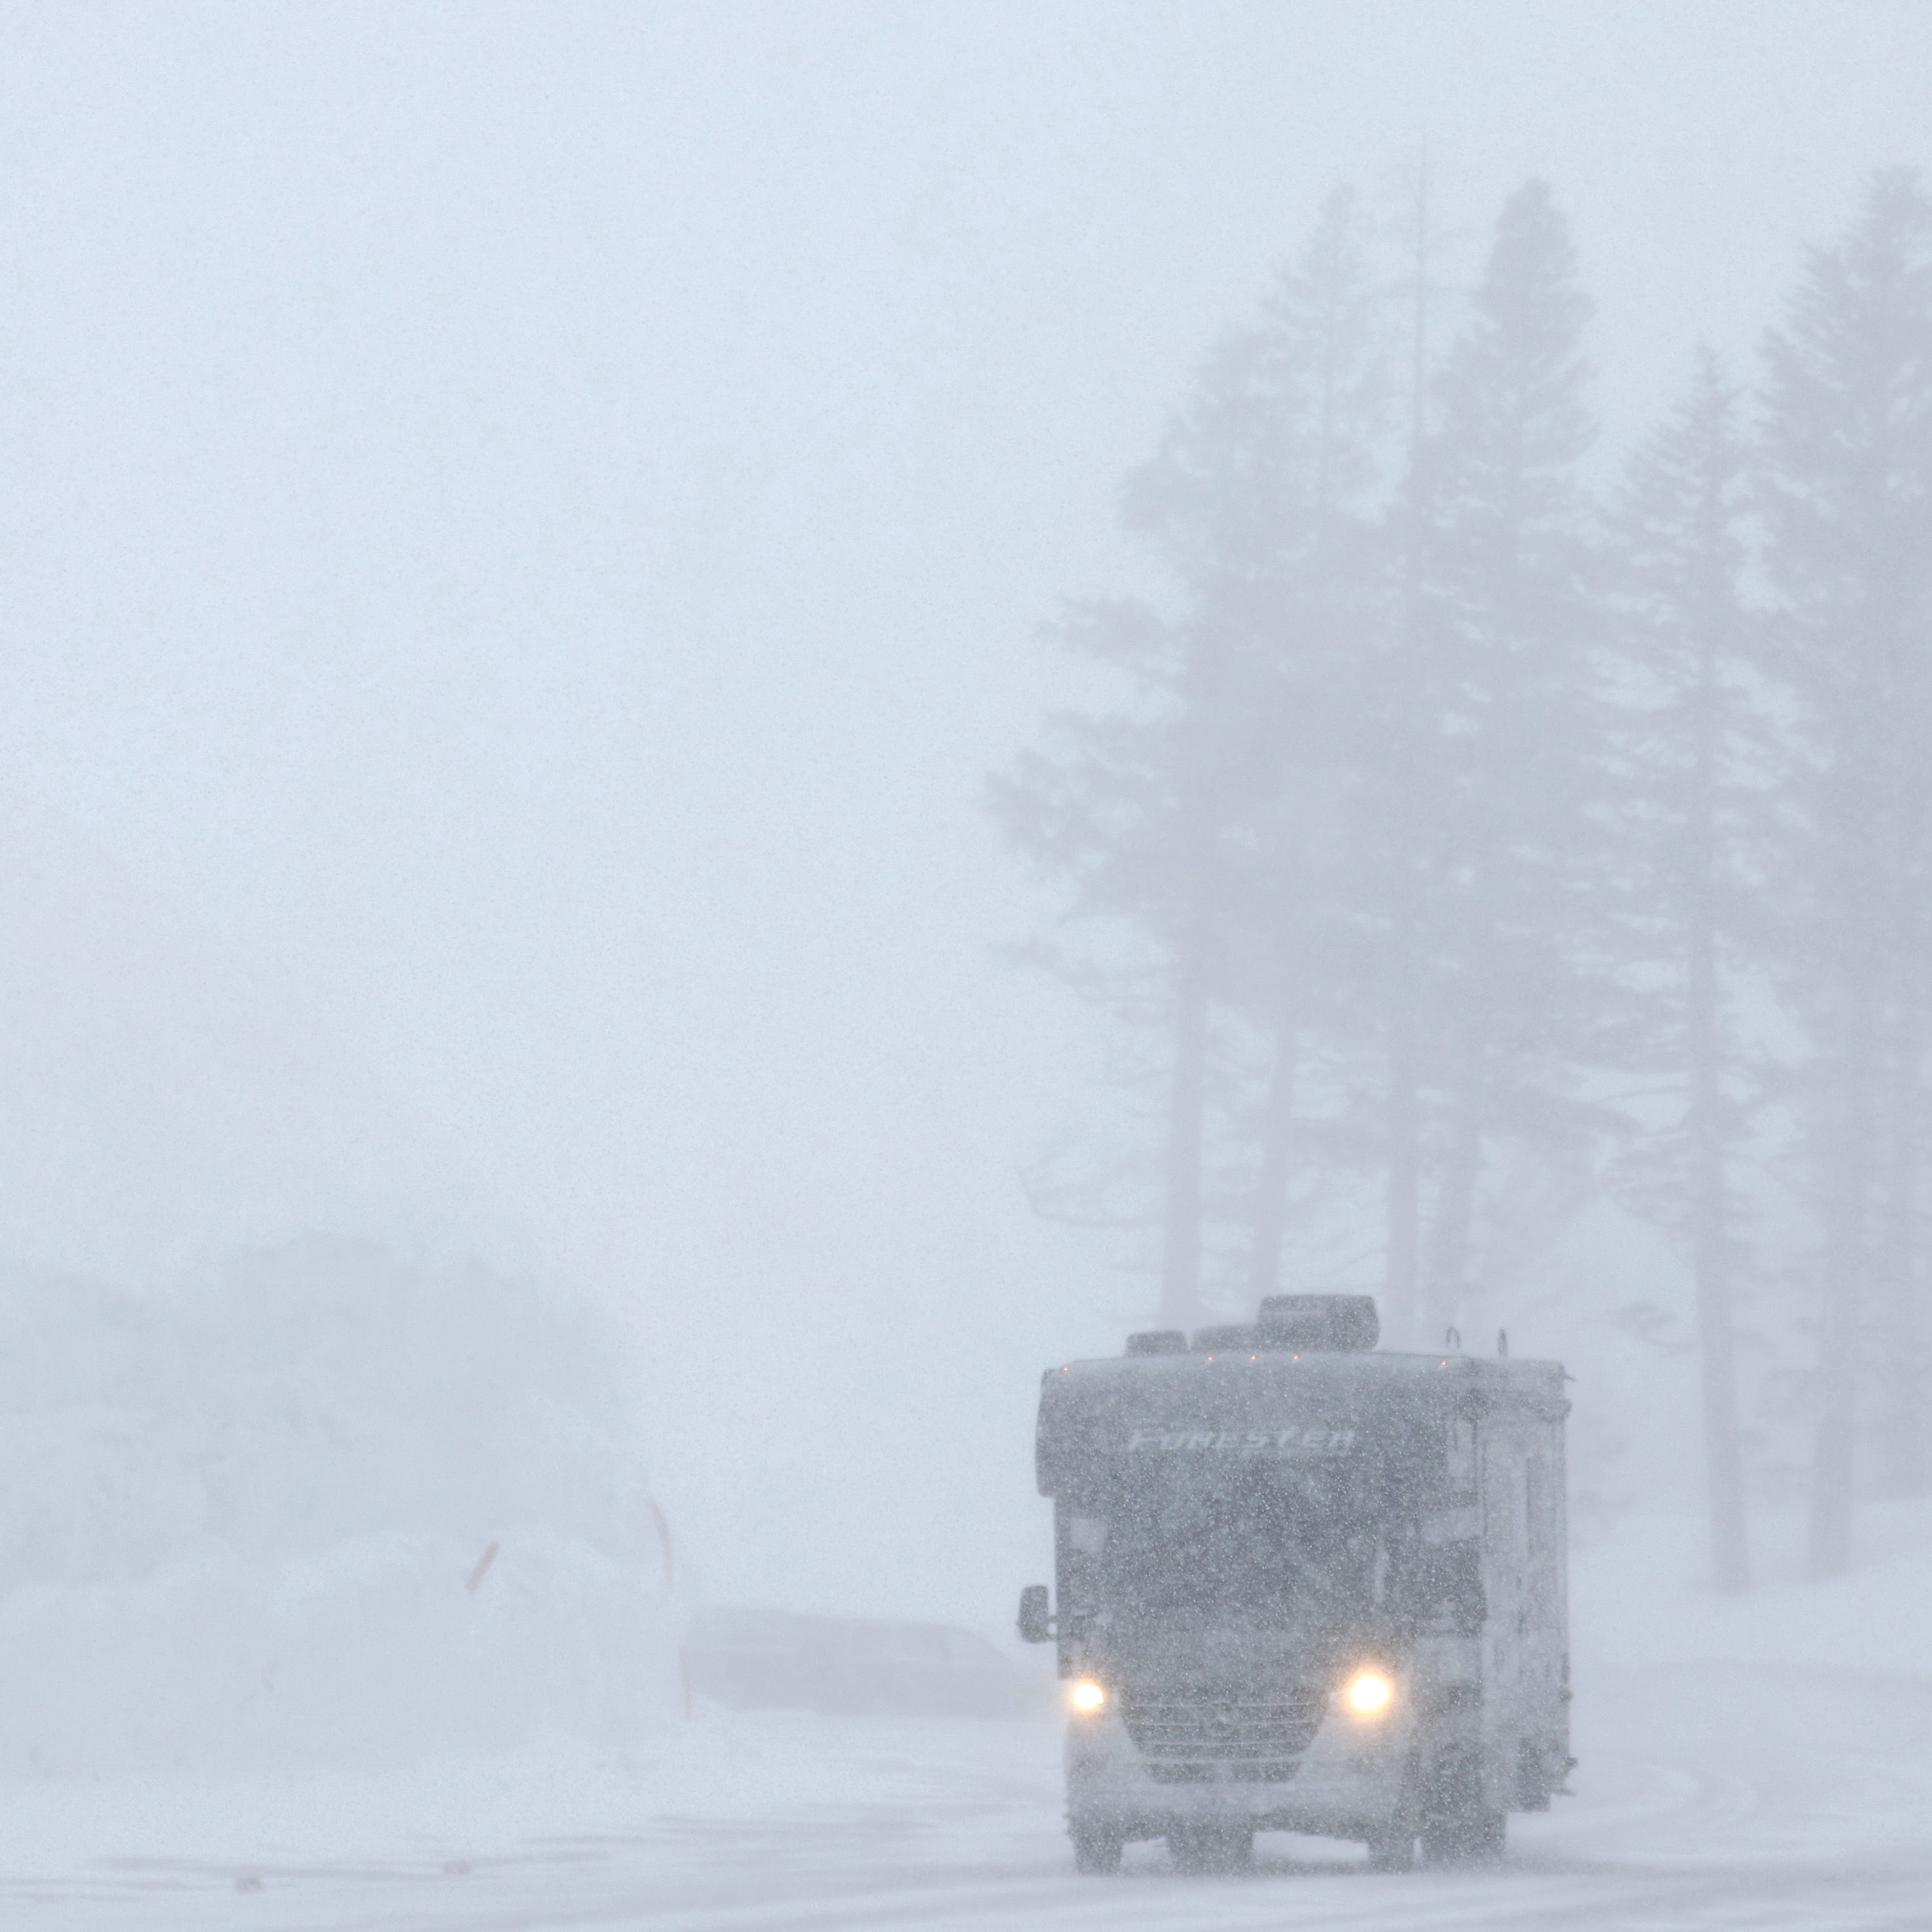 MAMMOTH LAKES, CALIFORNIA - MARCH 28:  A vehicle drives past a snowbank as snow falls in the Sierra Nevada mountains as yet another storm system arrives which is predicted to bring heavy snow to higher elevations on March 28, 2023 in Mammoth Lakes, California. The Pacific storm is delivering widespread rain and mountain snow to the U.S. west coast in Northern California and Oregon. After years of drought, the state snowpack average for California may hit an all time record from the several feet of new snow expected to   fall during the storm in parts of the Sierra Nevada mountains. (Photo by Mario Tama/Getty Images) ORG XMIT: 775959242 ORIG FILE ID: 1477614198